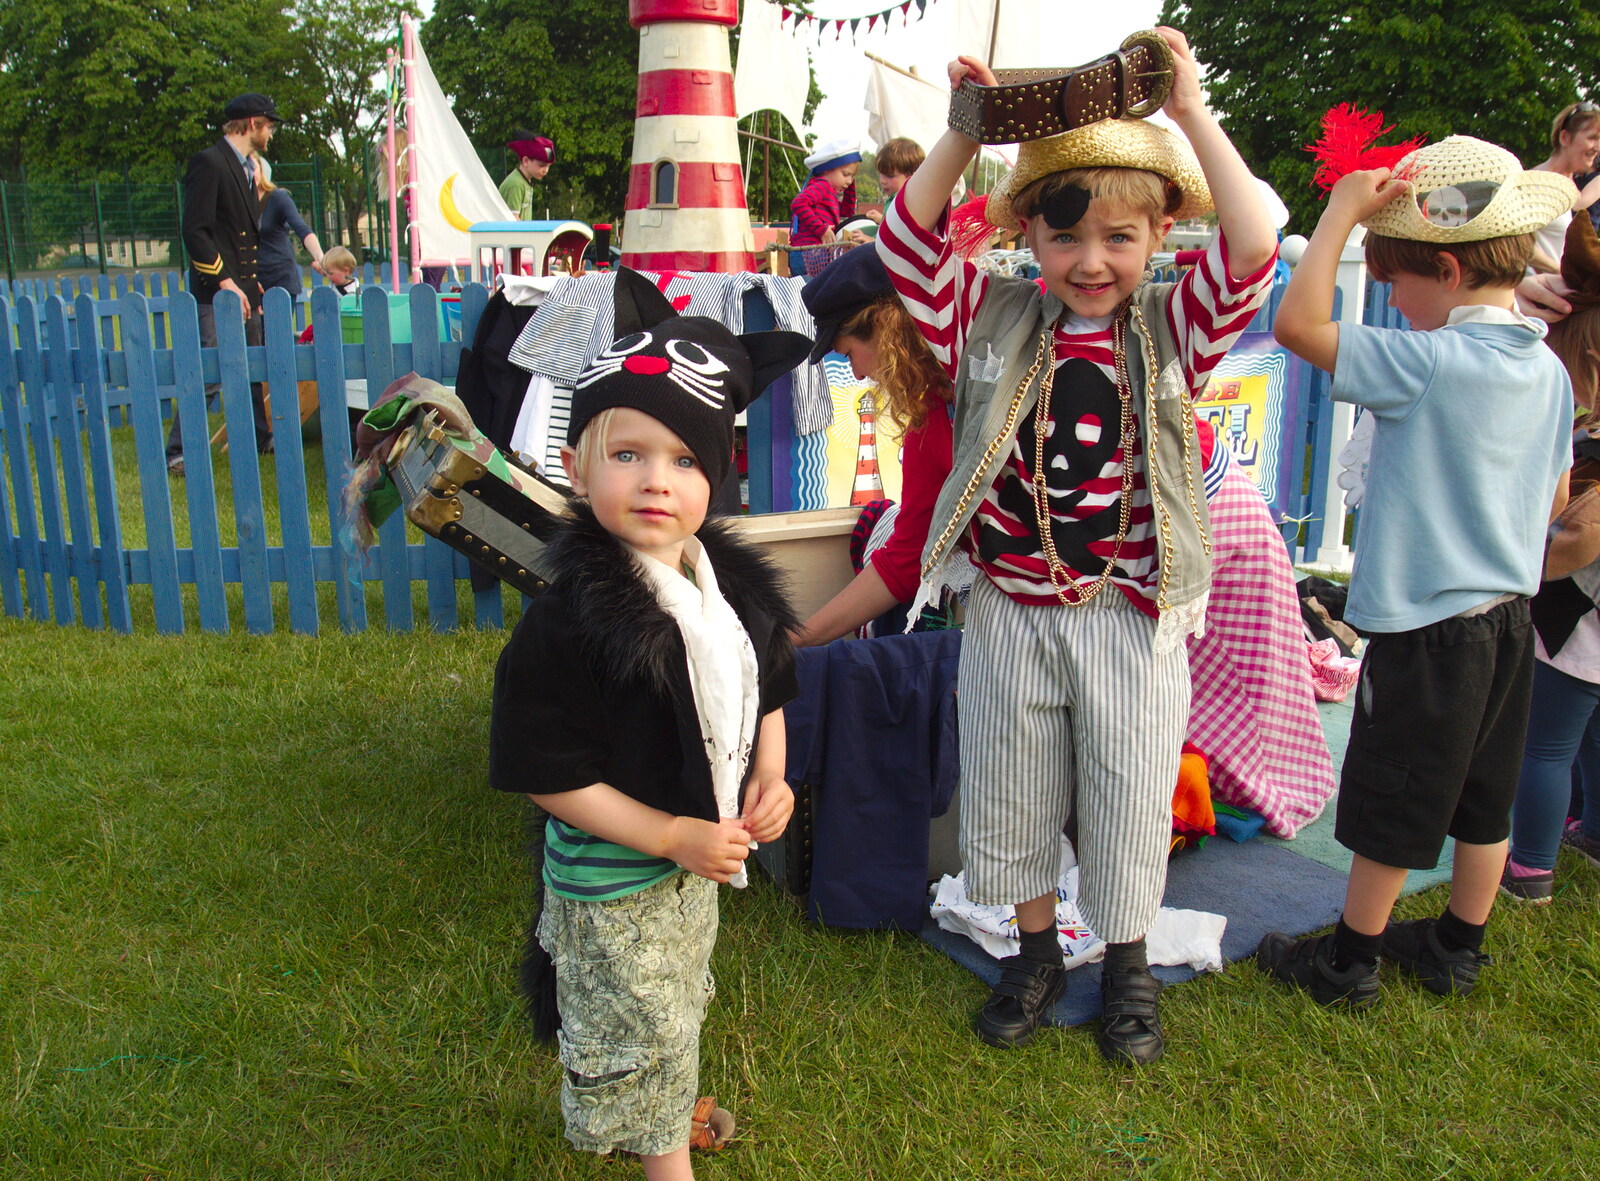 The boys are dressed as pirates from A Family Fun Day on the Park, Diss, Norfolk - 16th May 2014